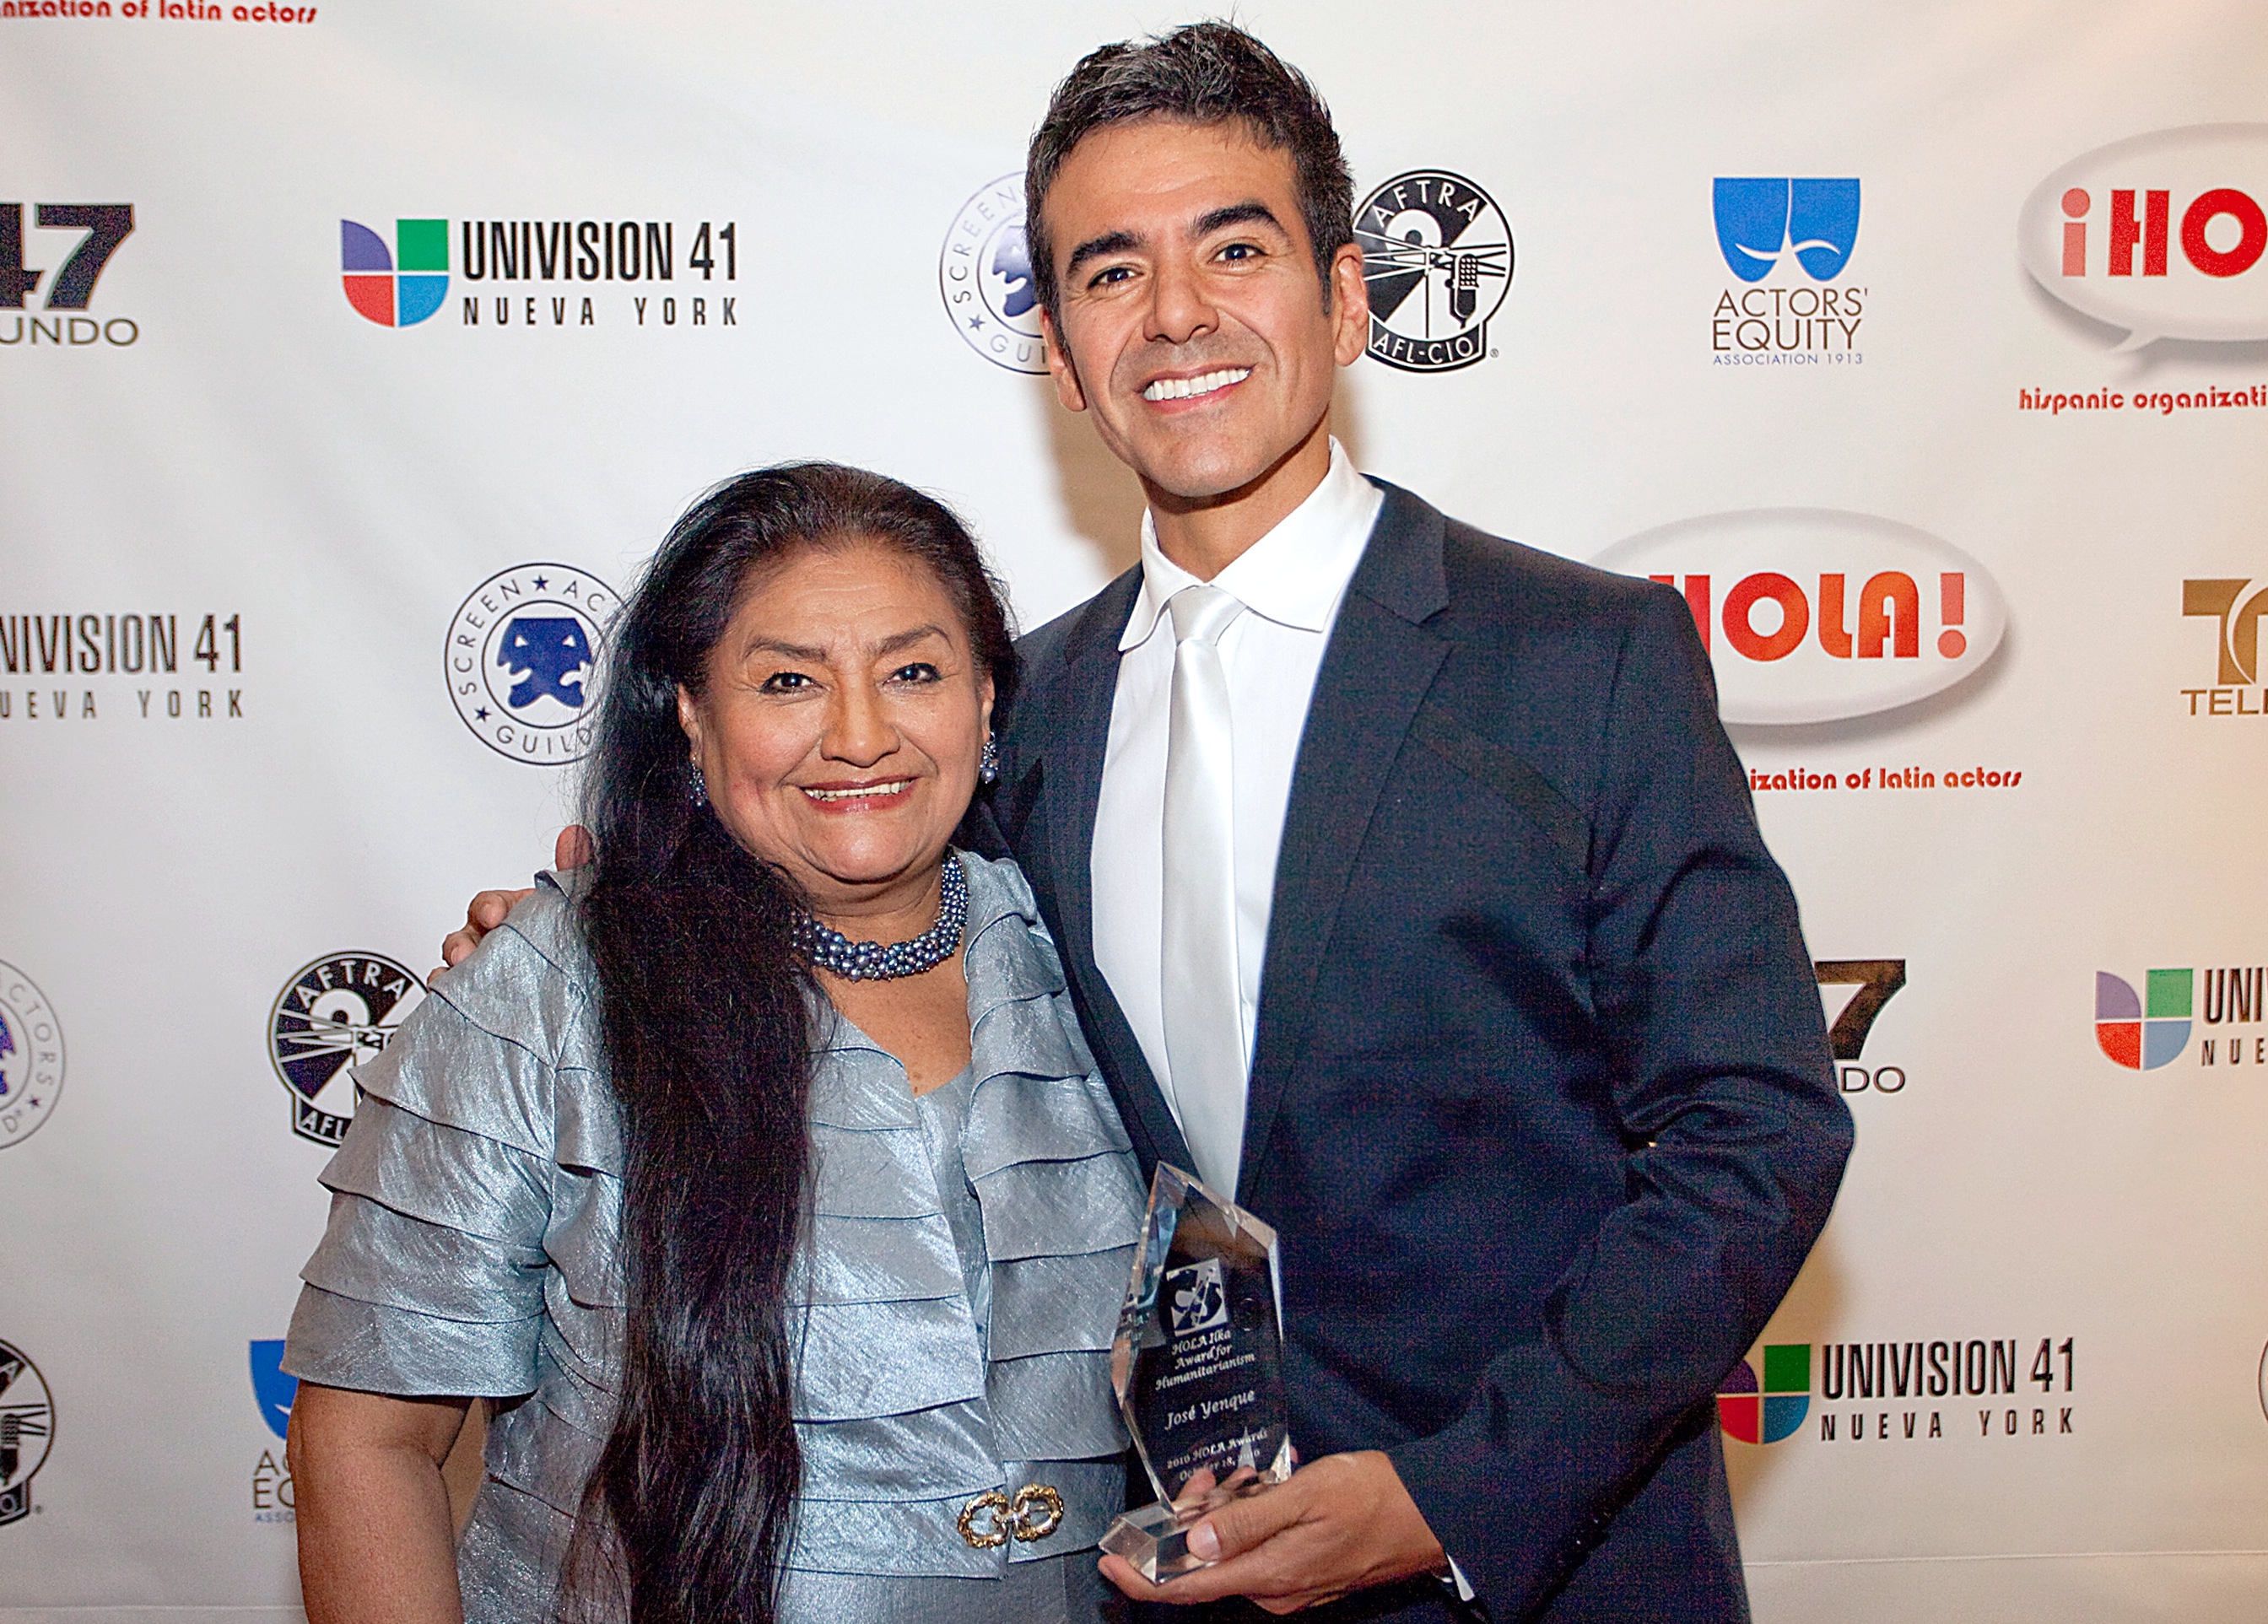 October 2010 - Jose Yenque with his mother/actress Teresa Yenque. Jose Yenque receives HOLA's Ilka Award for Humanitarianism at New York City's Players Club